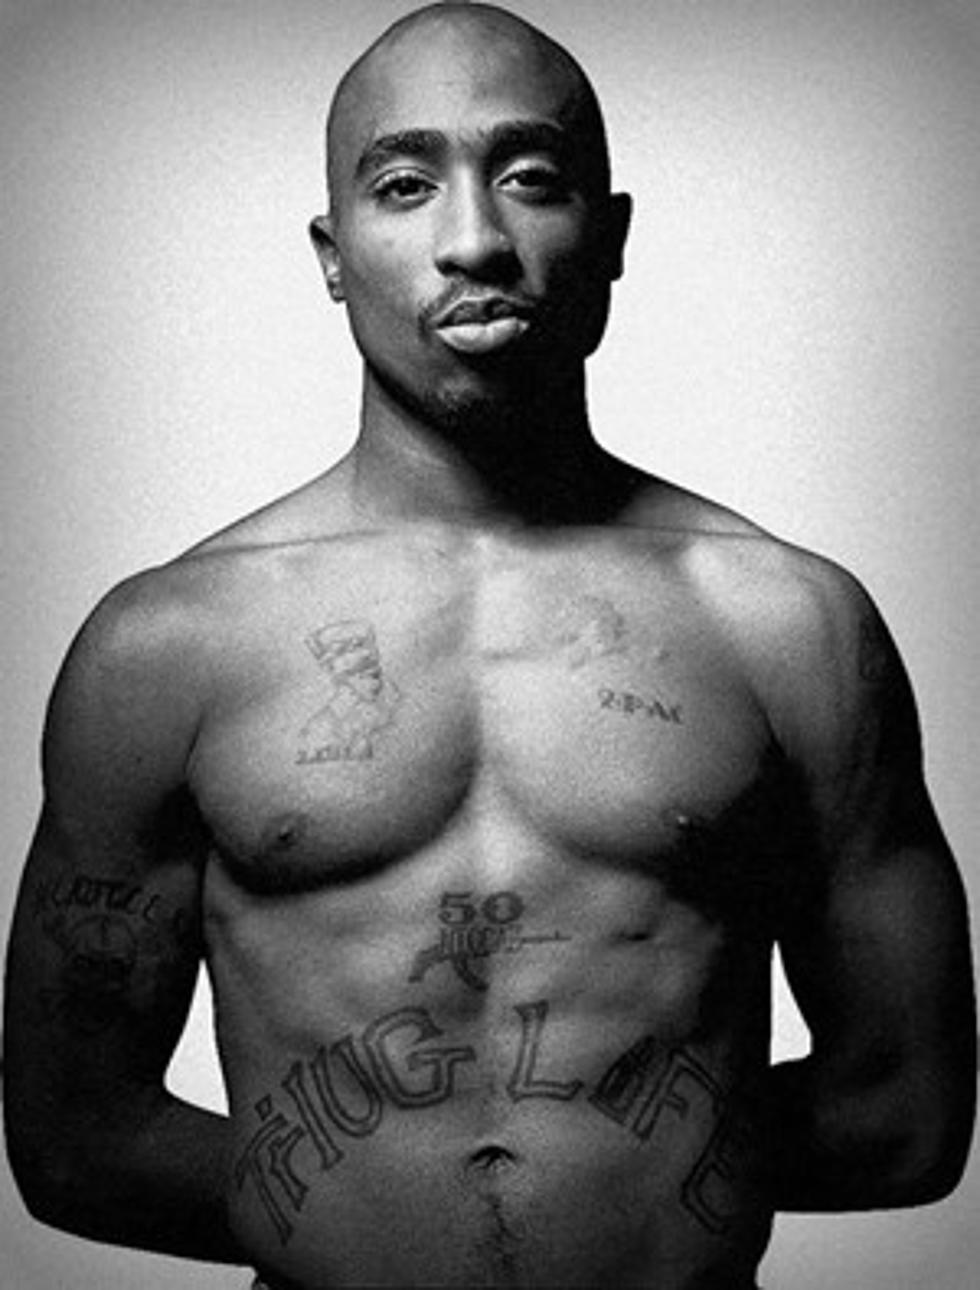 Tupac’s 1995 Prison Essay ‘Is Thug Life Dead?’ Sells For $173K – Tha Wire